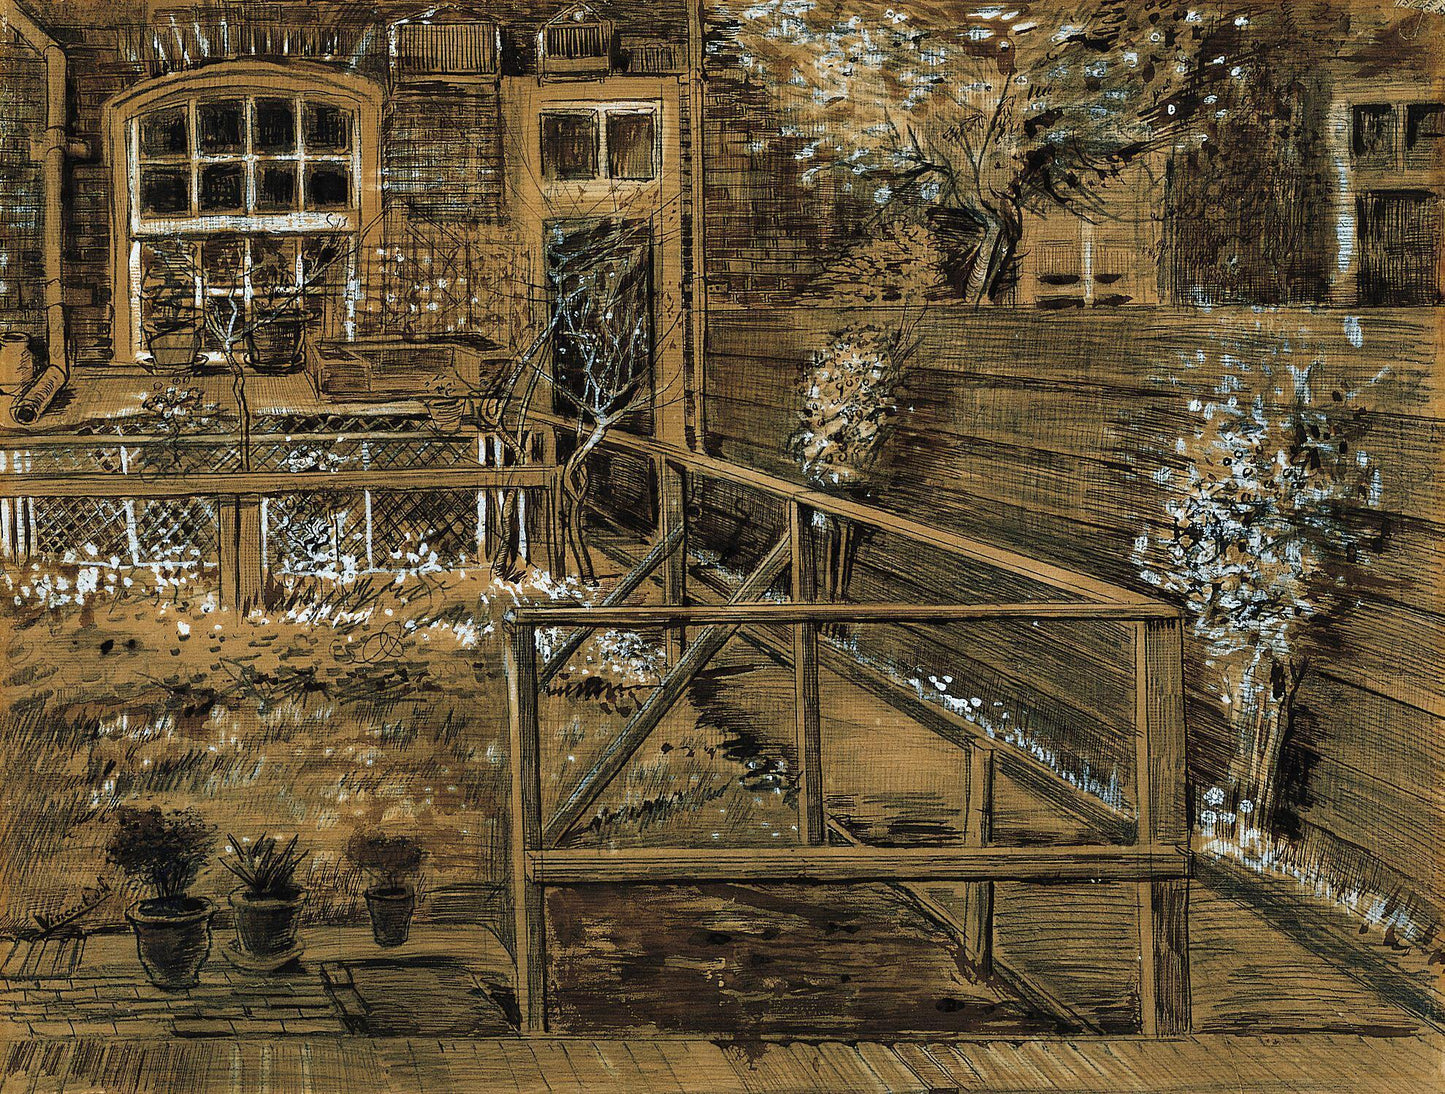 Back Garden of Sien's Mother's House, the Hague, 1882